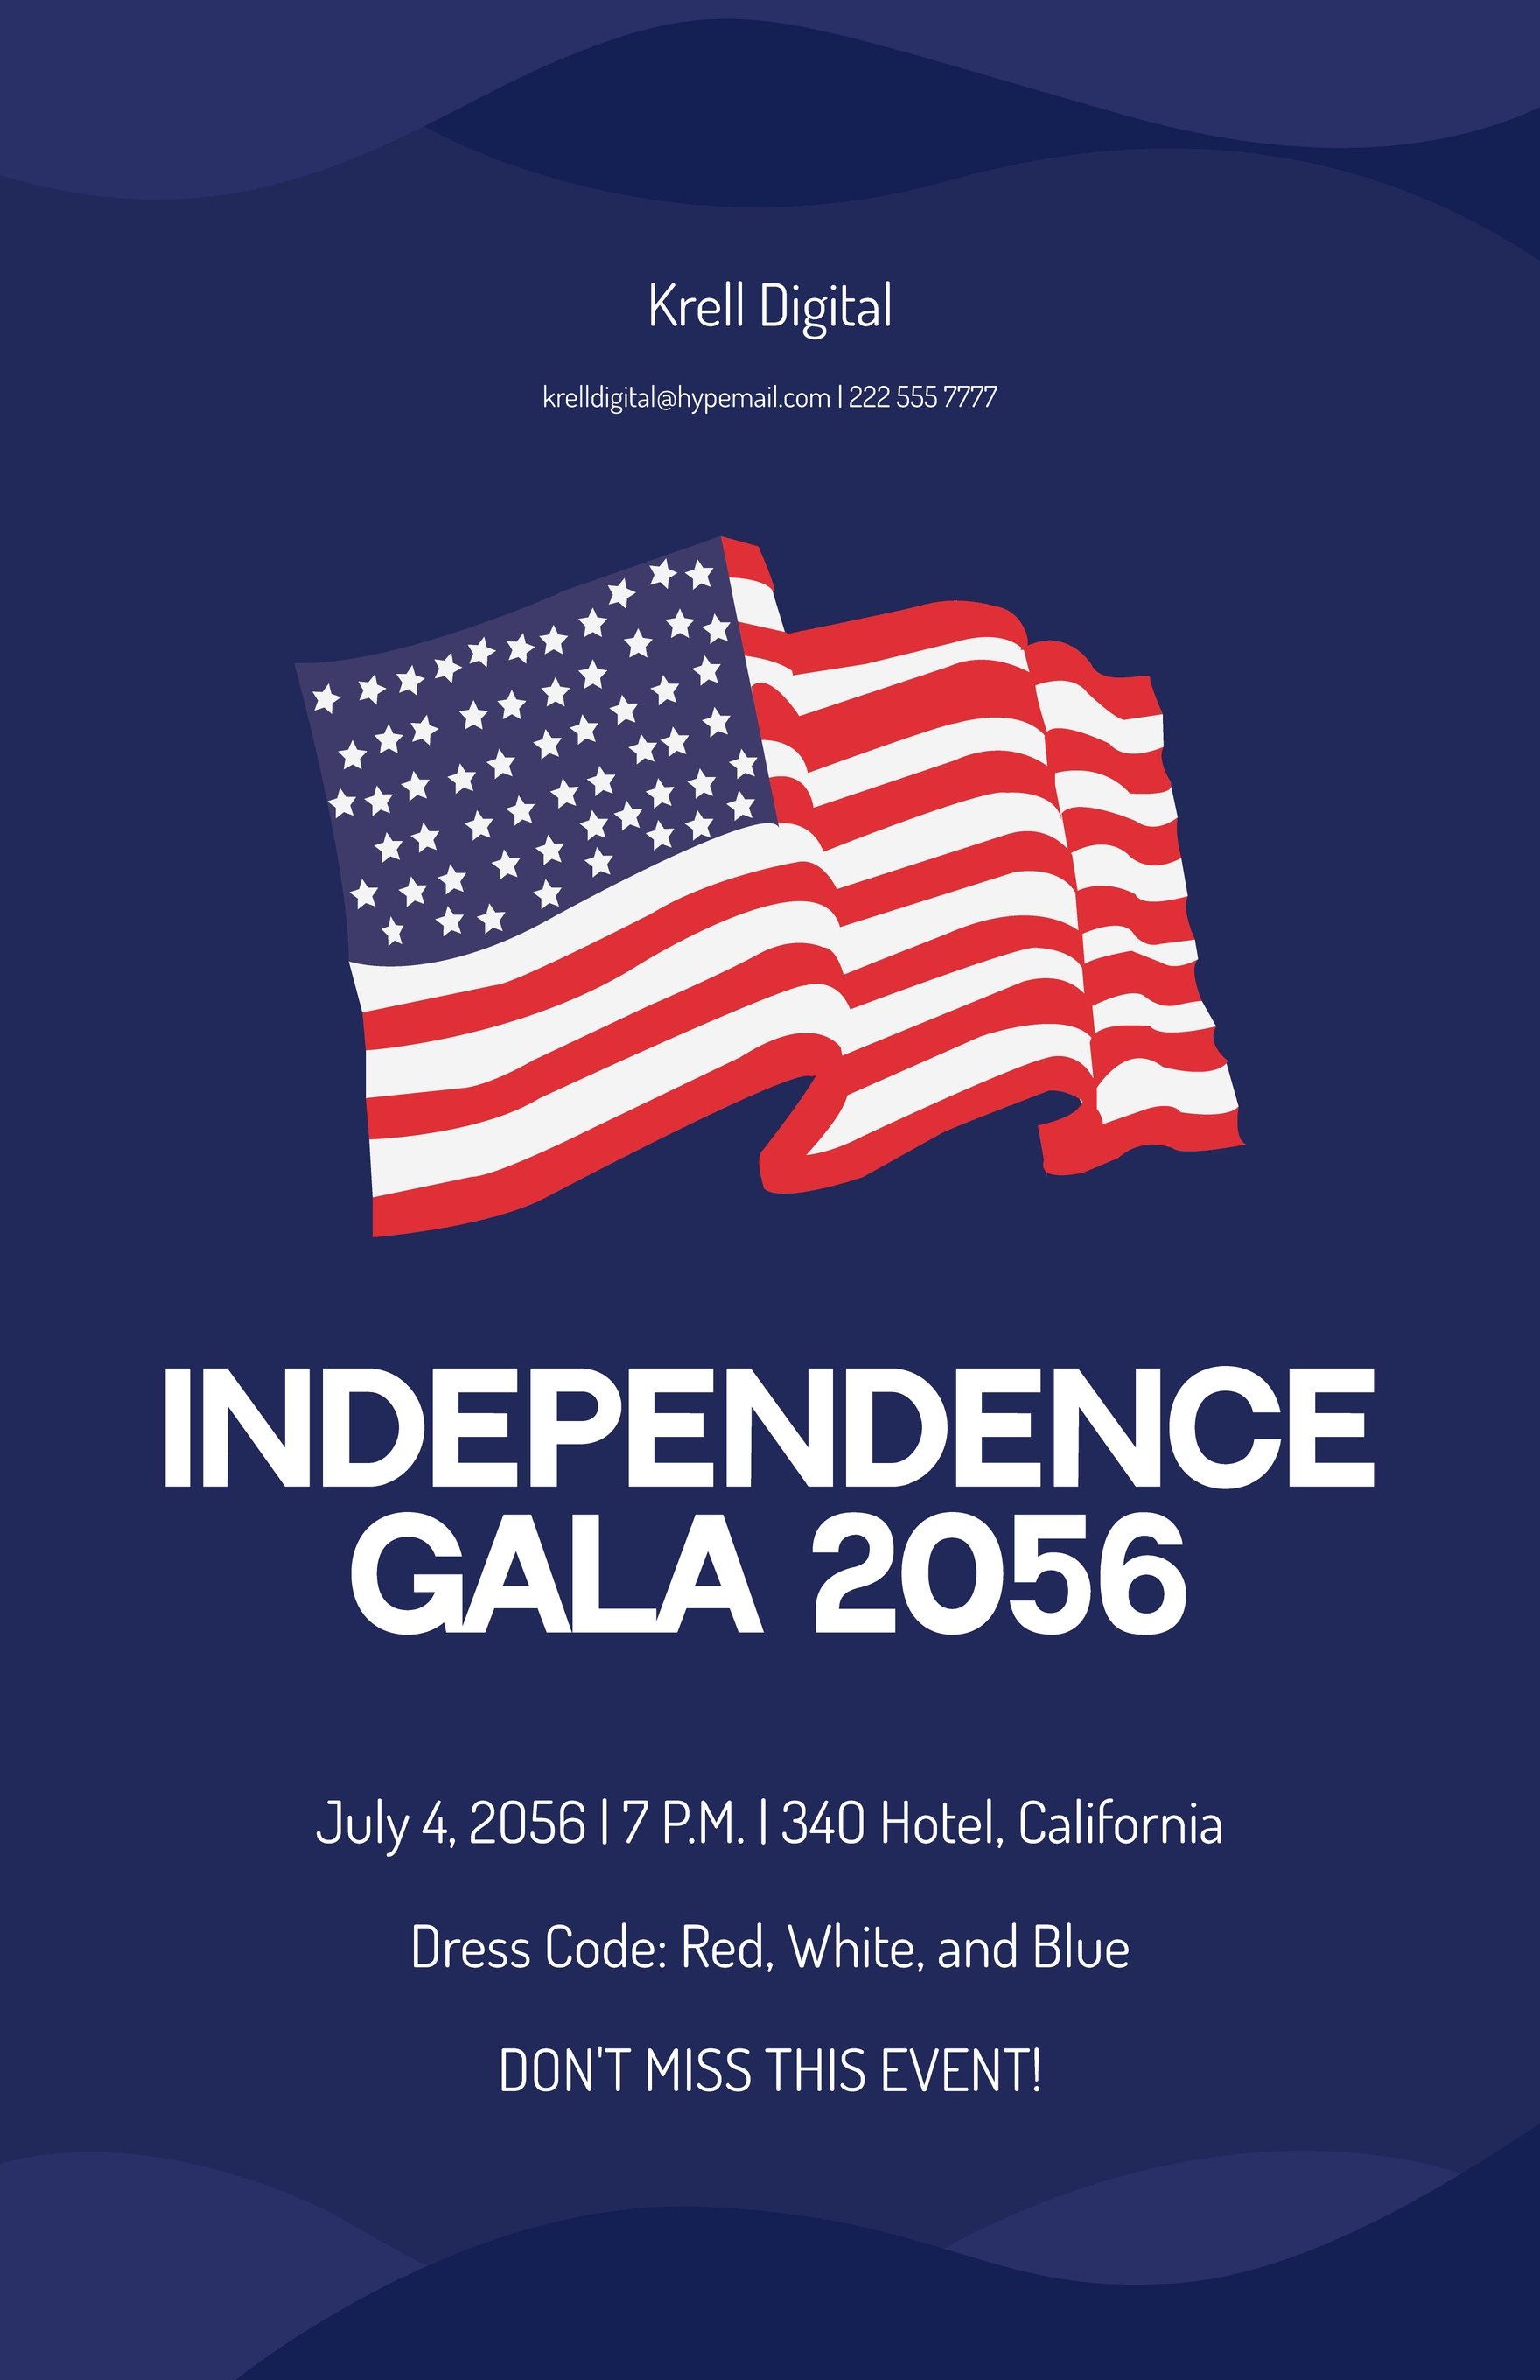 Free Independence Gala Poster Template in Word, Google Docs, Illustrator, PSD, Apple Pages, Publisher